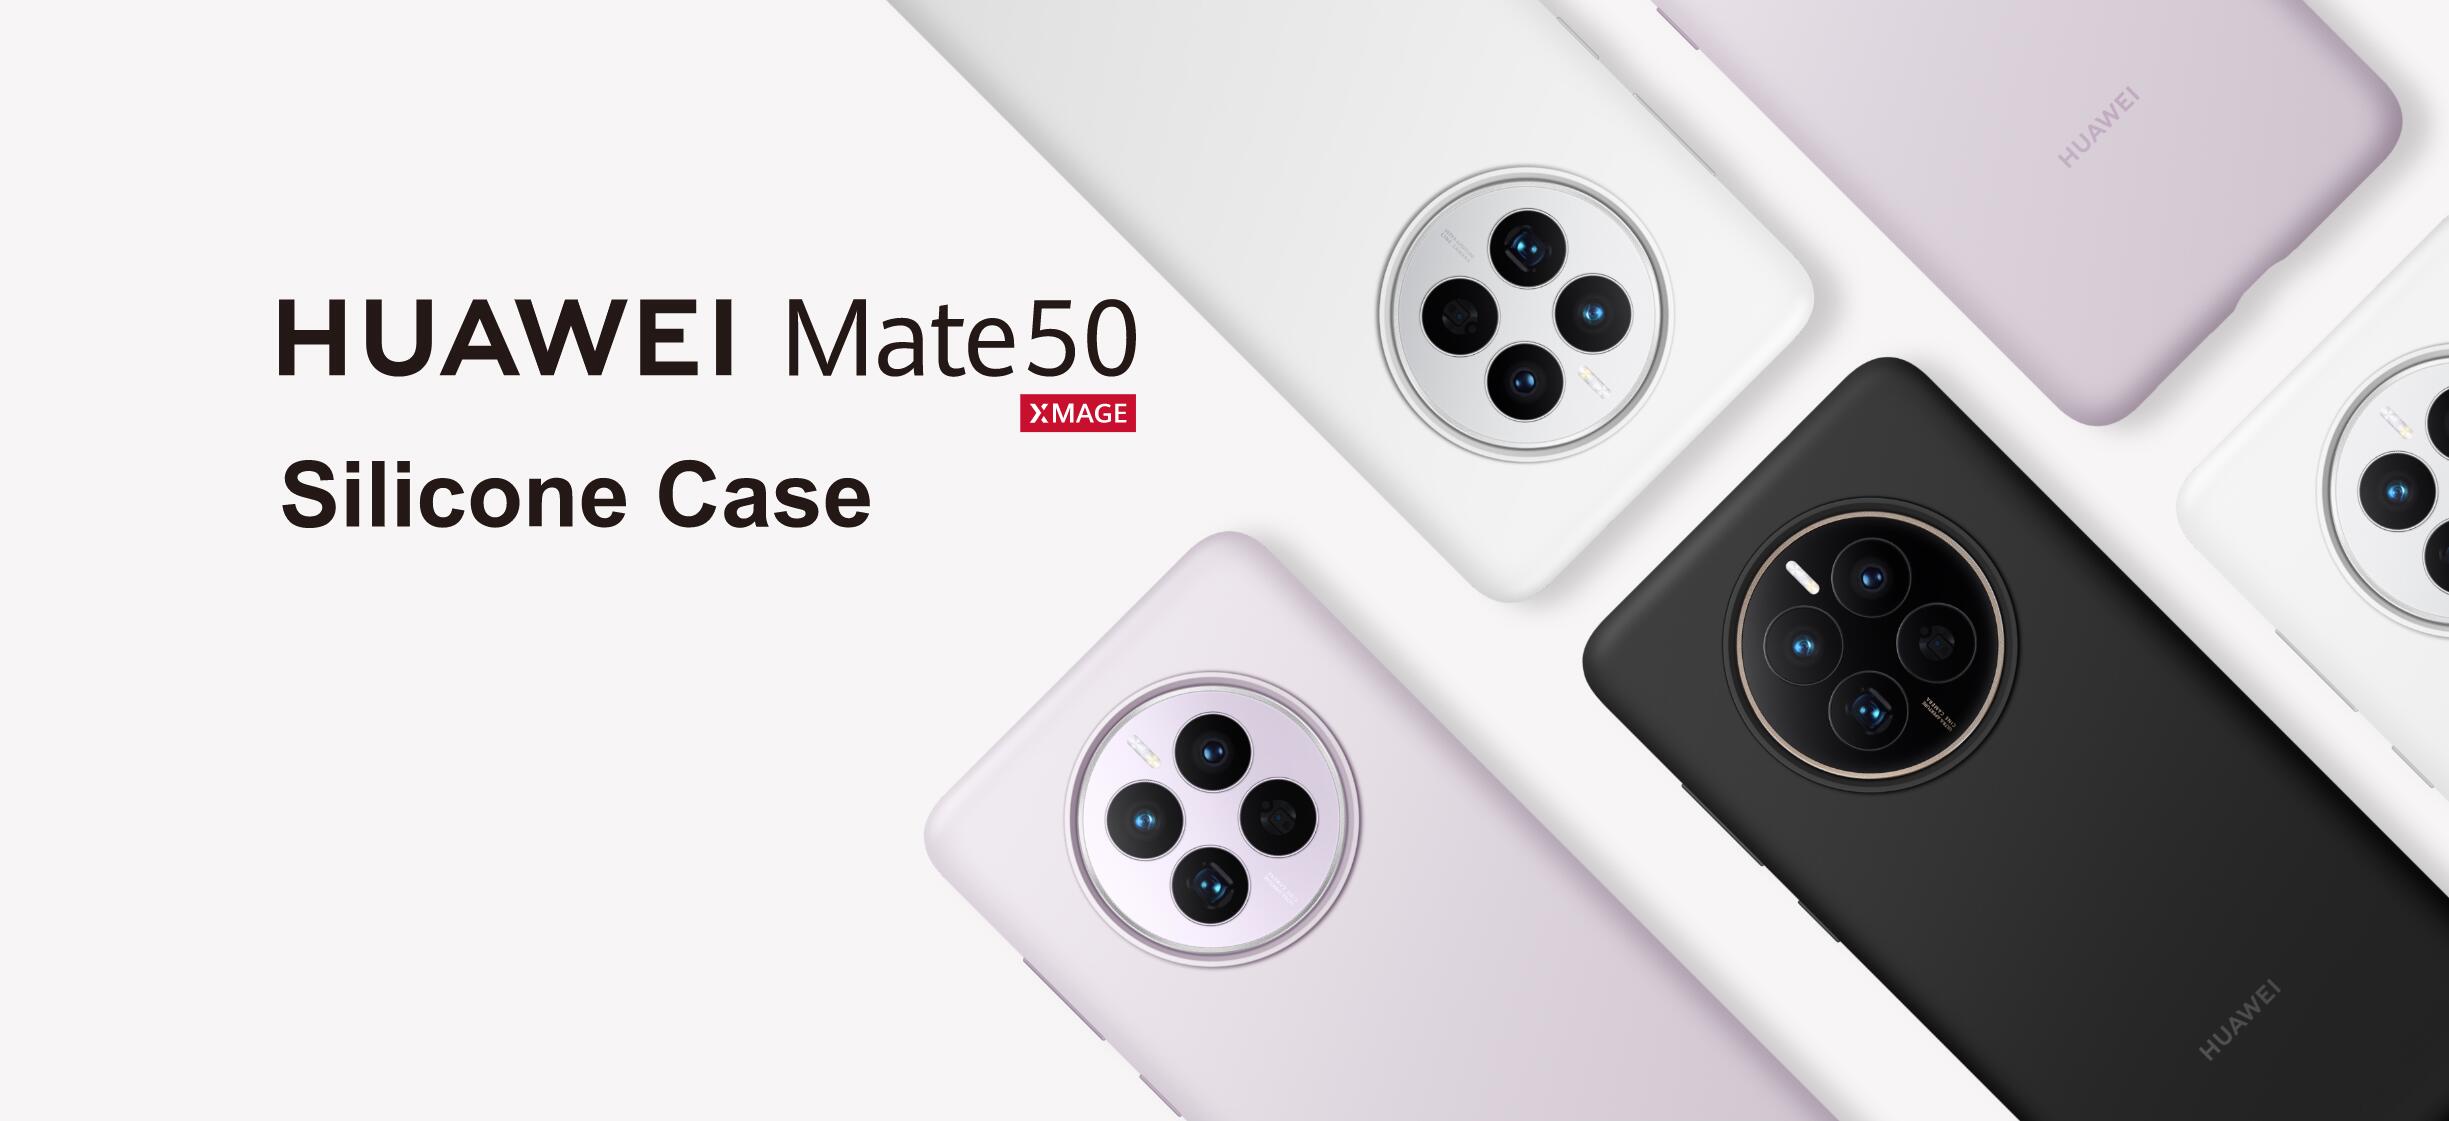  Huawei Mate 50 Silicone Case 